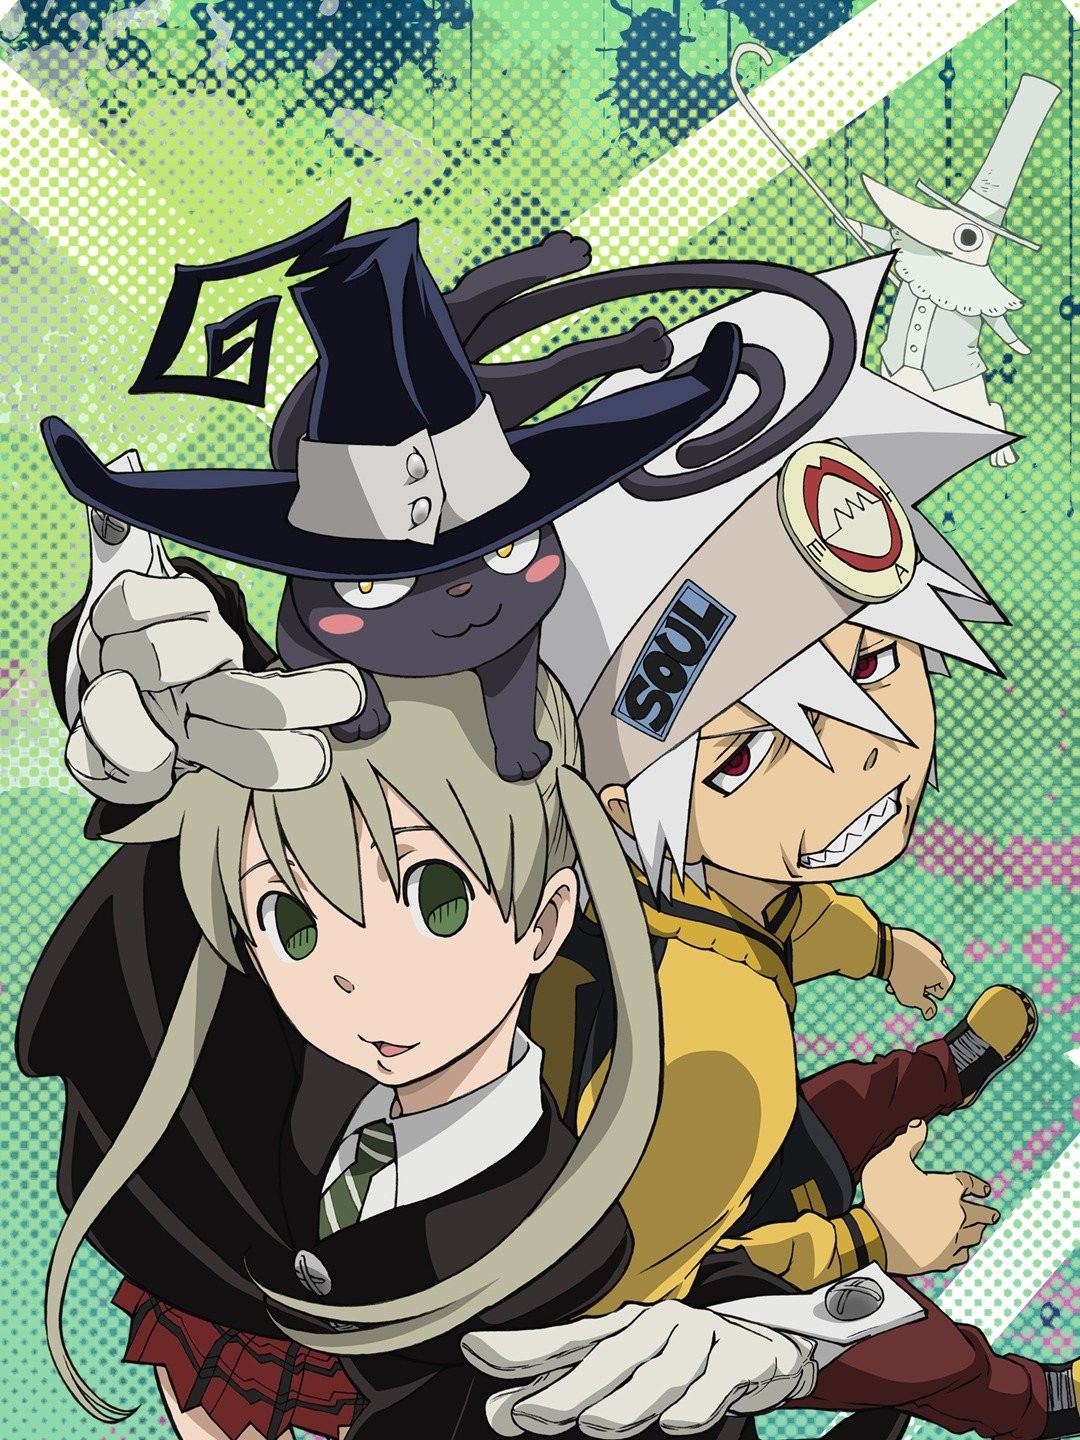 Soul Eater - Rotten Tomatoes